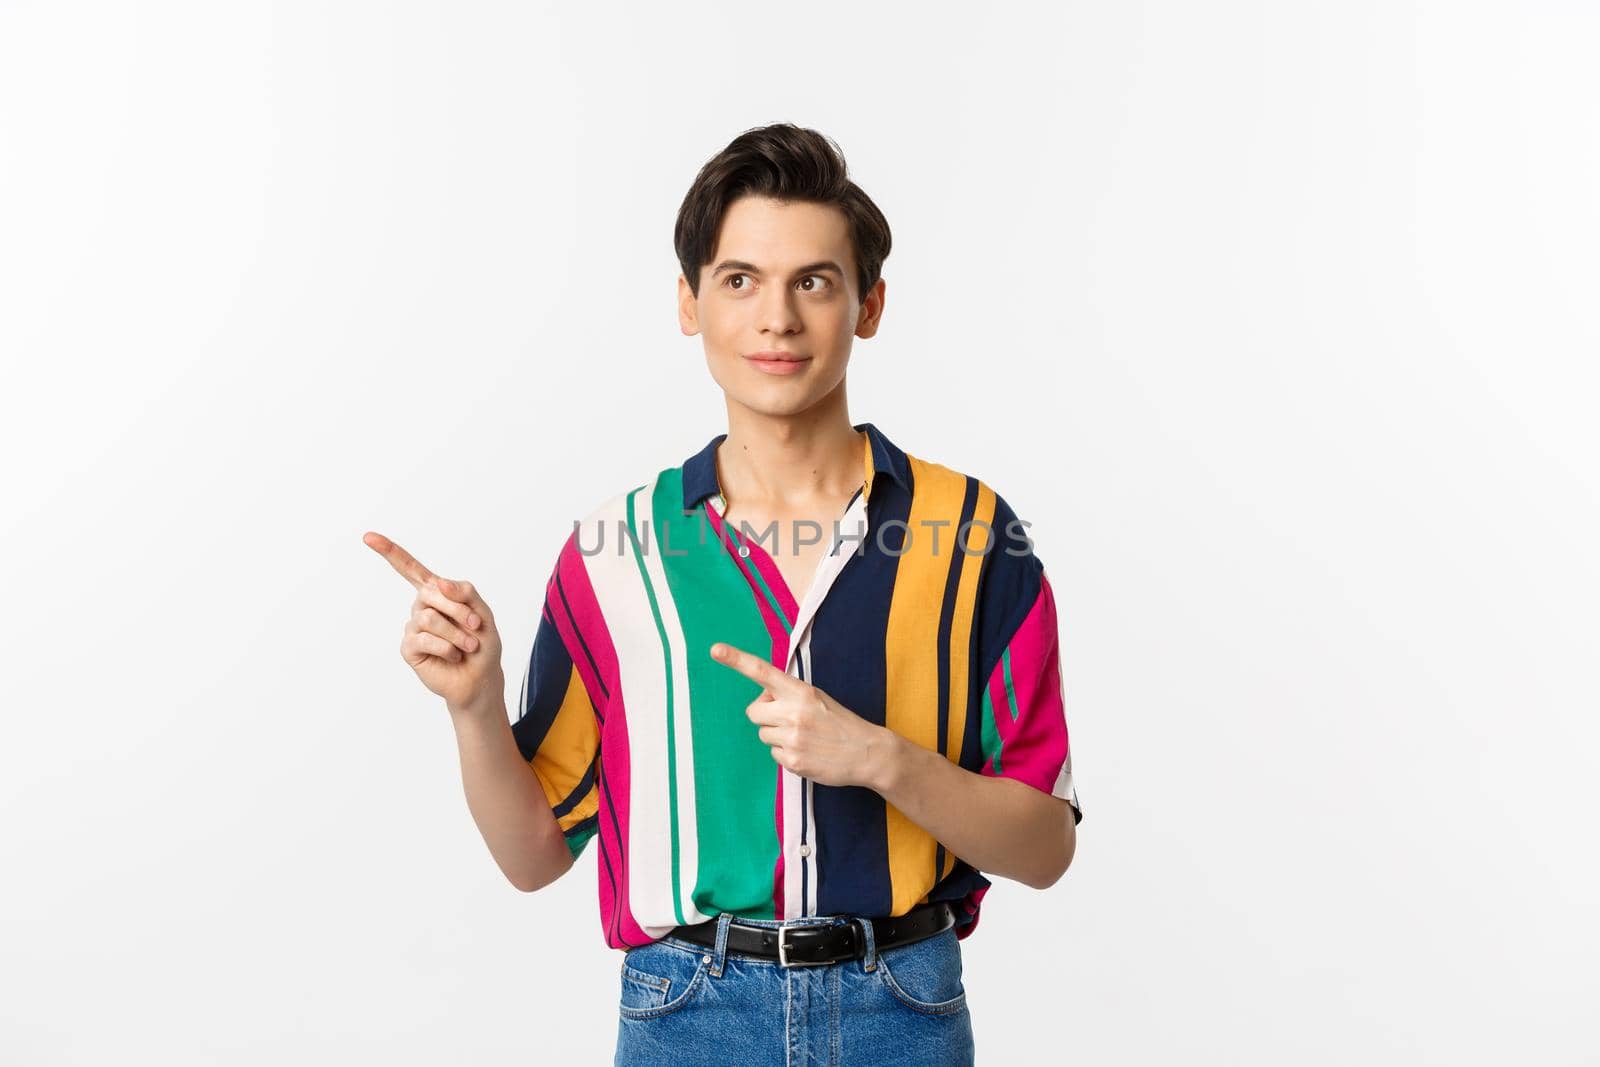 Young handsome queer man pointing, looking left at logo, smiling pleased, standing over white background.